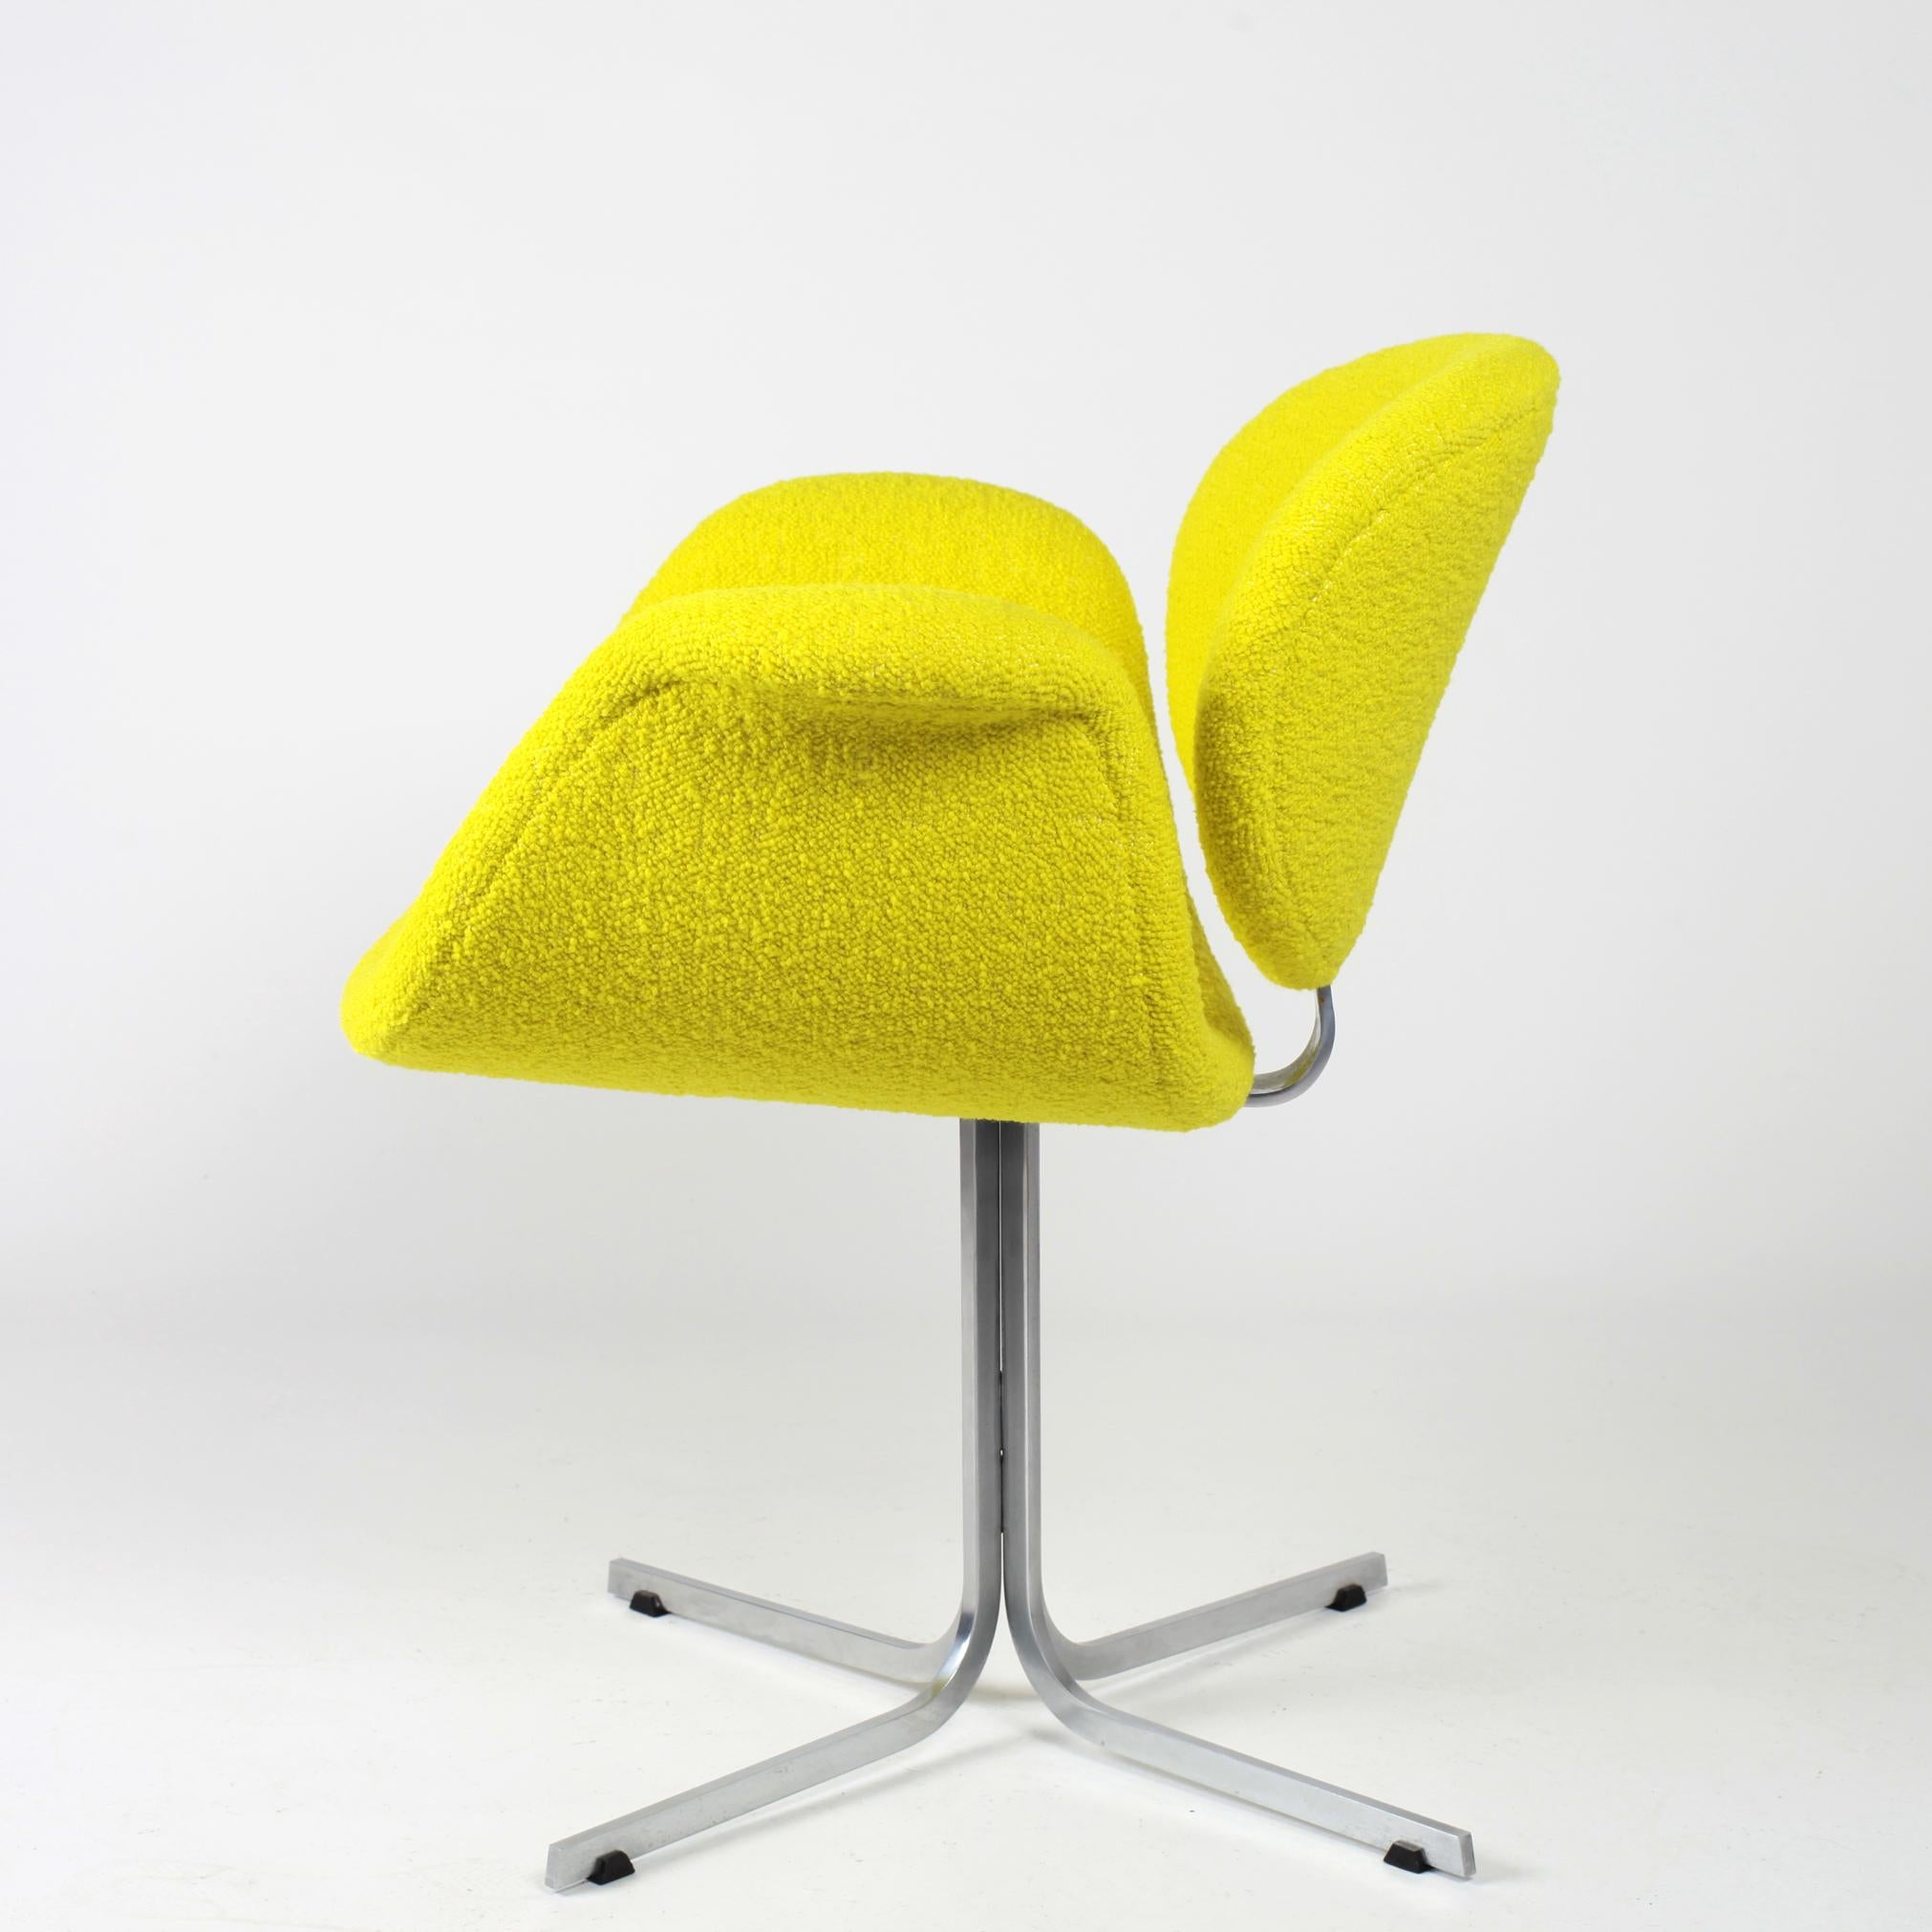 The first edition of the little tulip chair by Pierre Paulin for Artifort, 1963.
Newly upholstered with Yellow Dedar bouclette fabric.
Label is present.